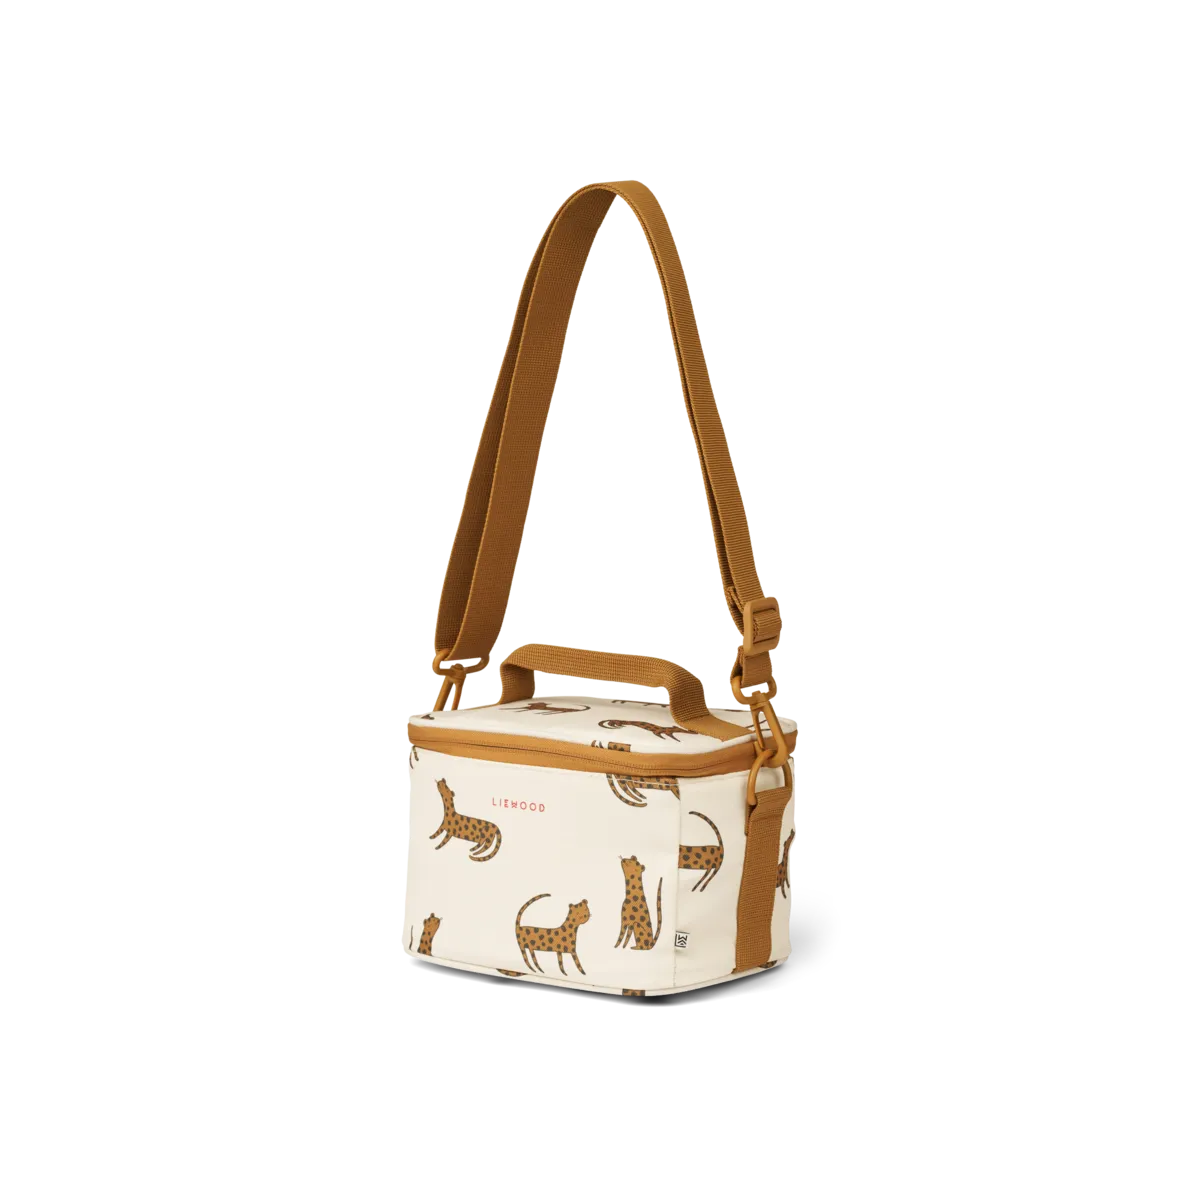 Sac isotherme Toby Leopard / Sandy- LIEWOOD LW18626 1493 5715493200039